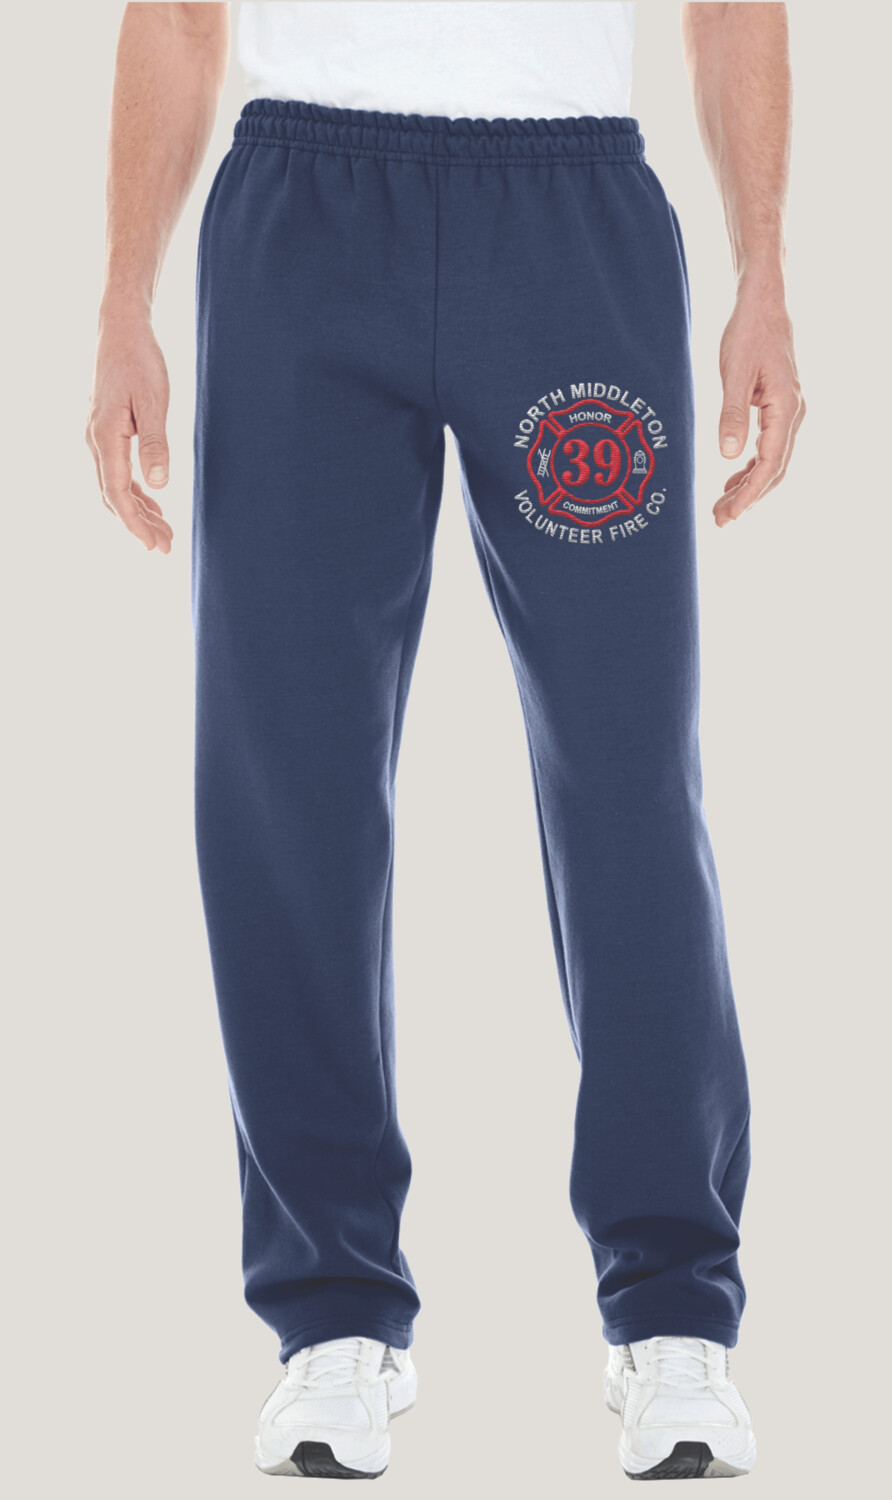 North Middleton Fire Company Open-Bottom Sweatpants with Pockets